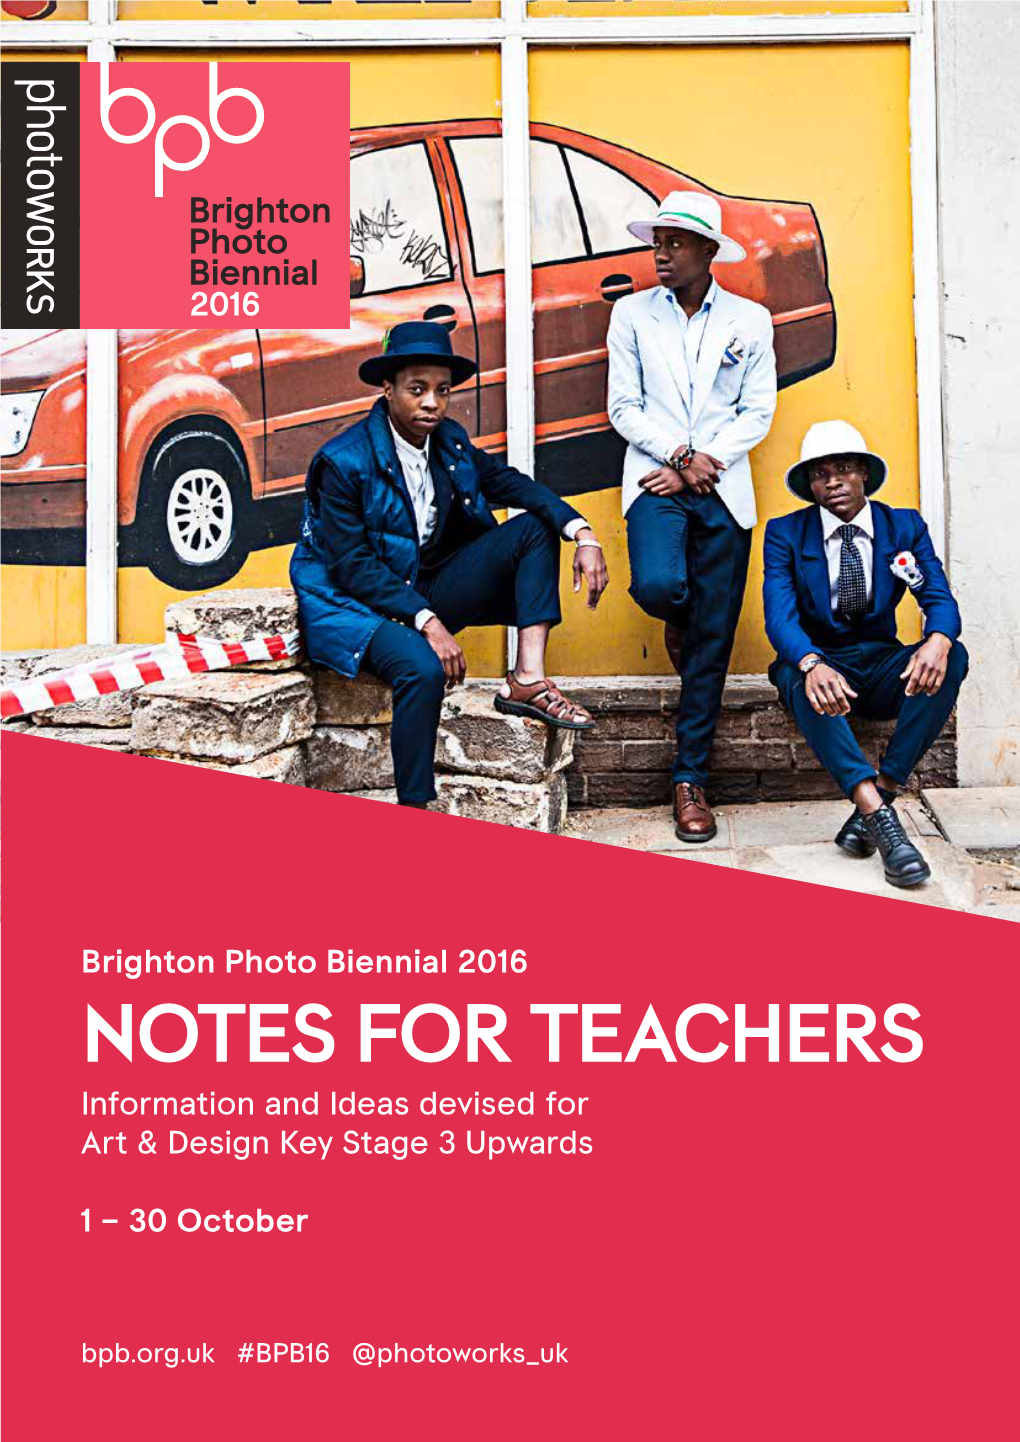 NOTES for TEACHERS Information and Ideas Devised for Art & Design Key Stage 3 Upwards